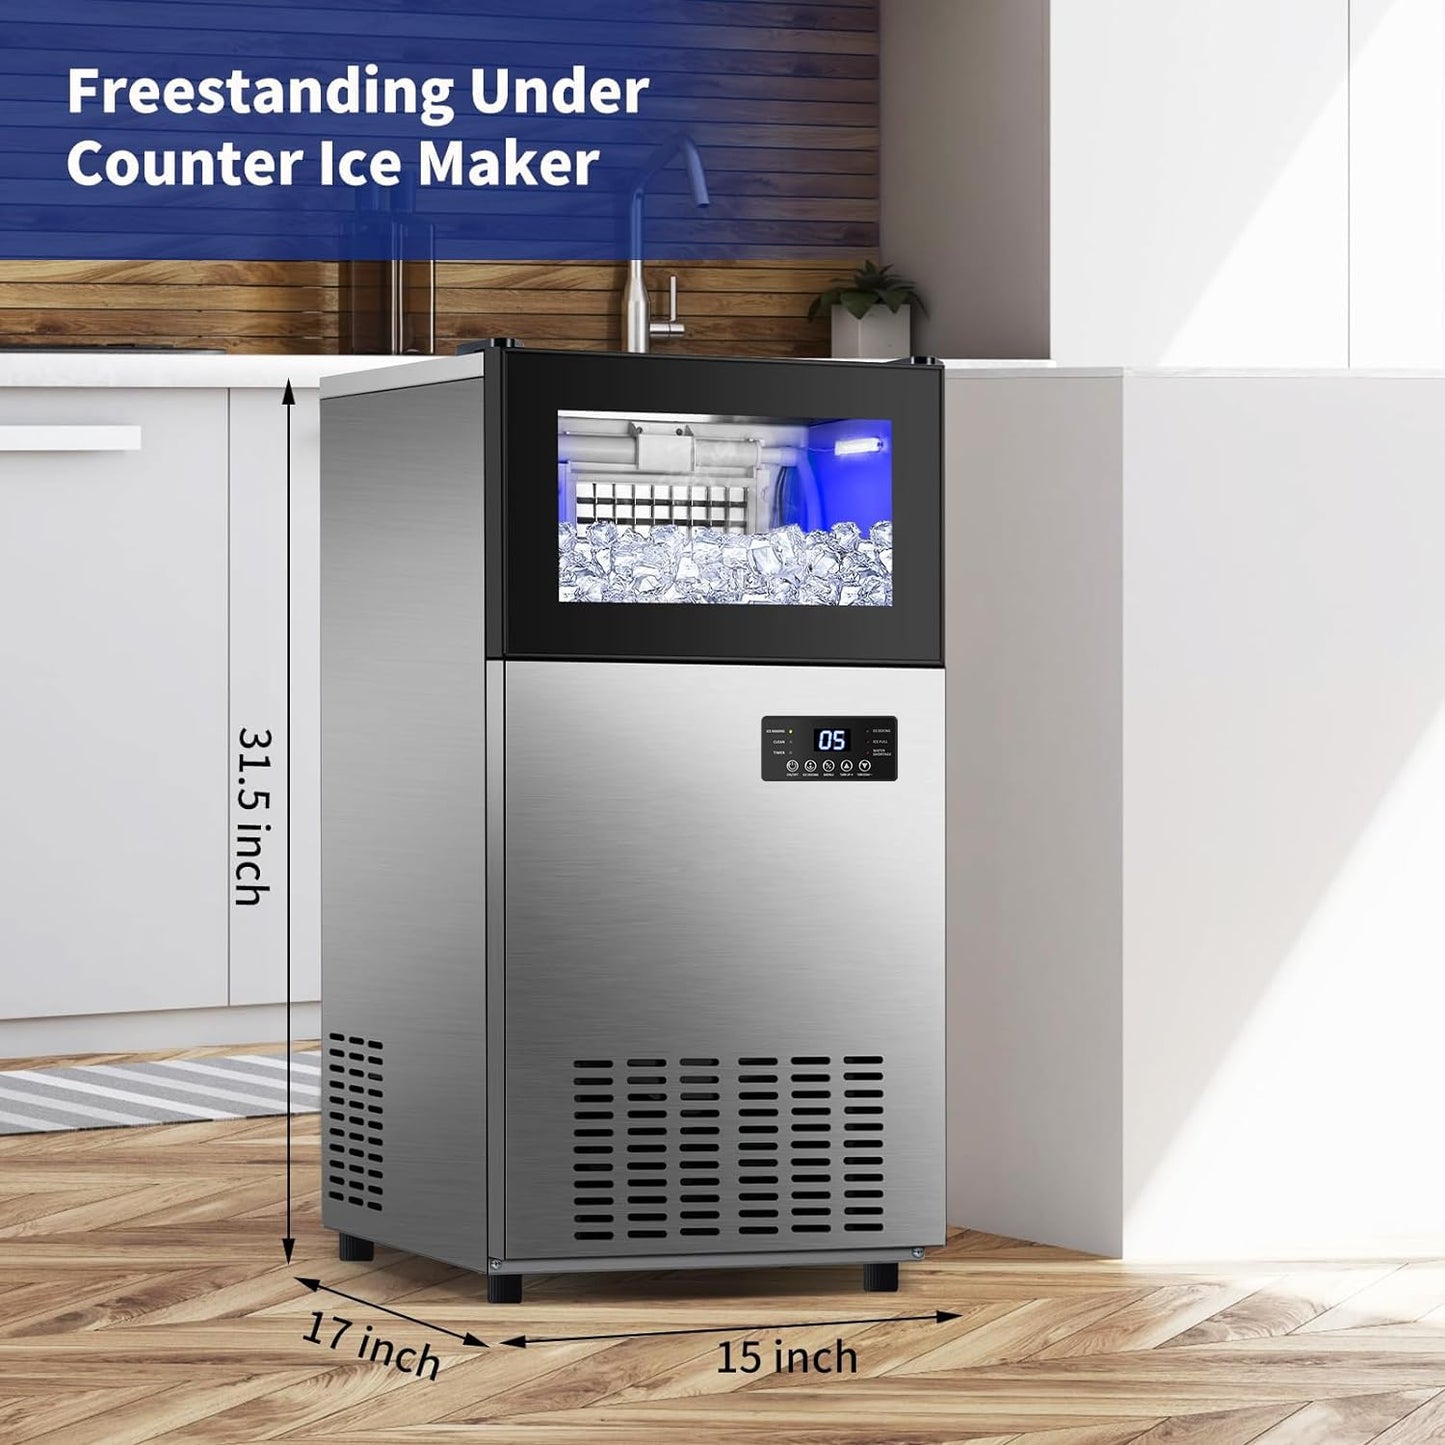 Commercial Ice Maker 130 LBS/24H, Upgraded 15" Wide Under Counter Ice Maker with 35LBS Ice Capacity